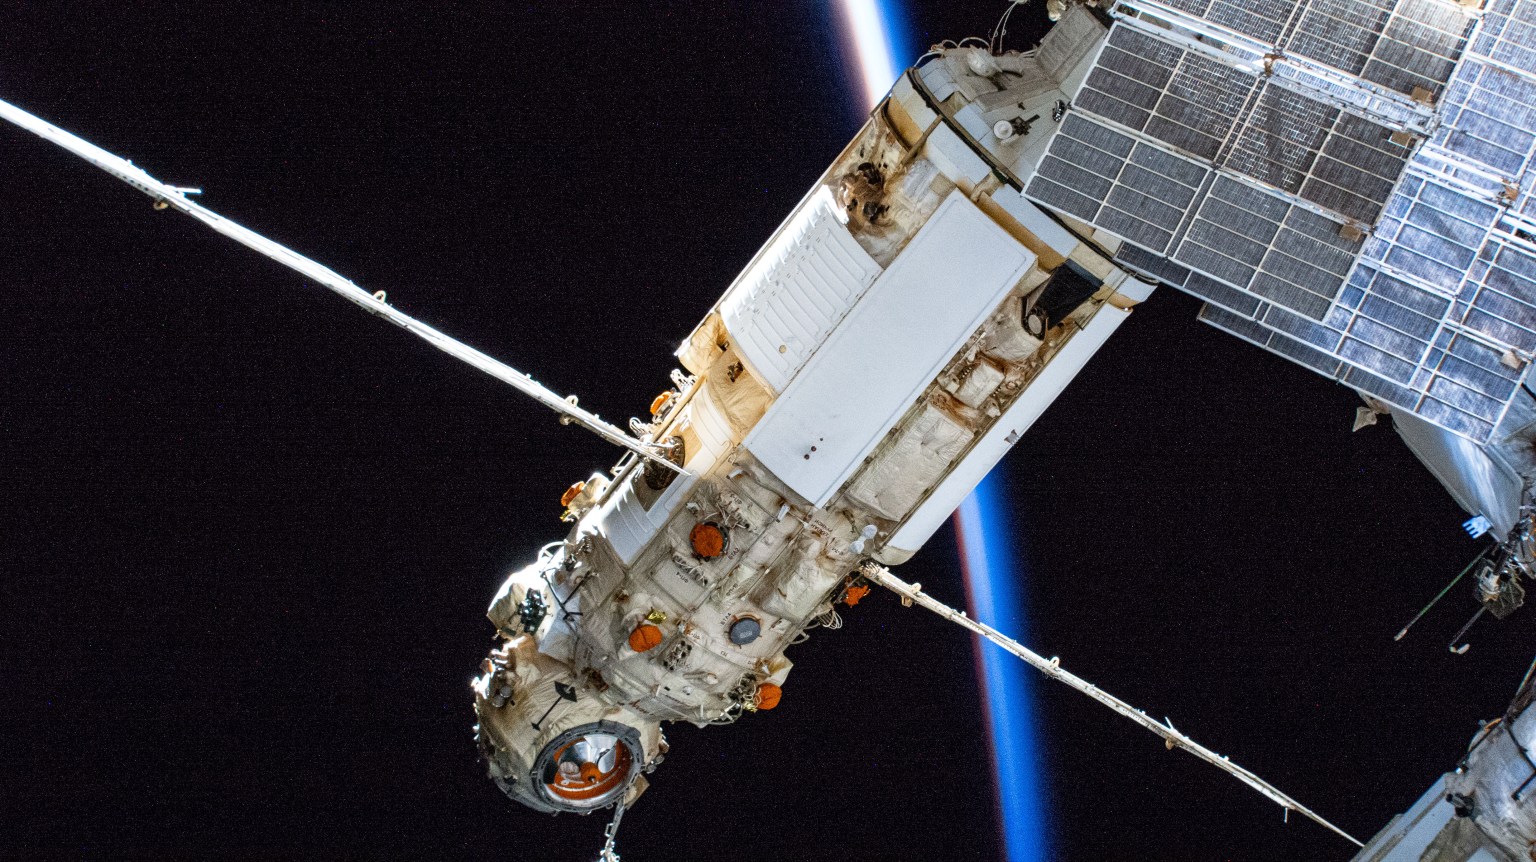 Russia's Nauka multipurpose laboratory module is pictured as the International Space Station flew into an orbital sunset 267 miles above North America.